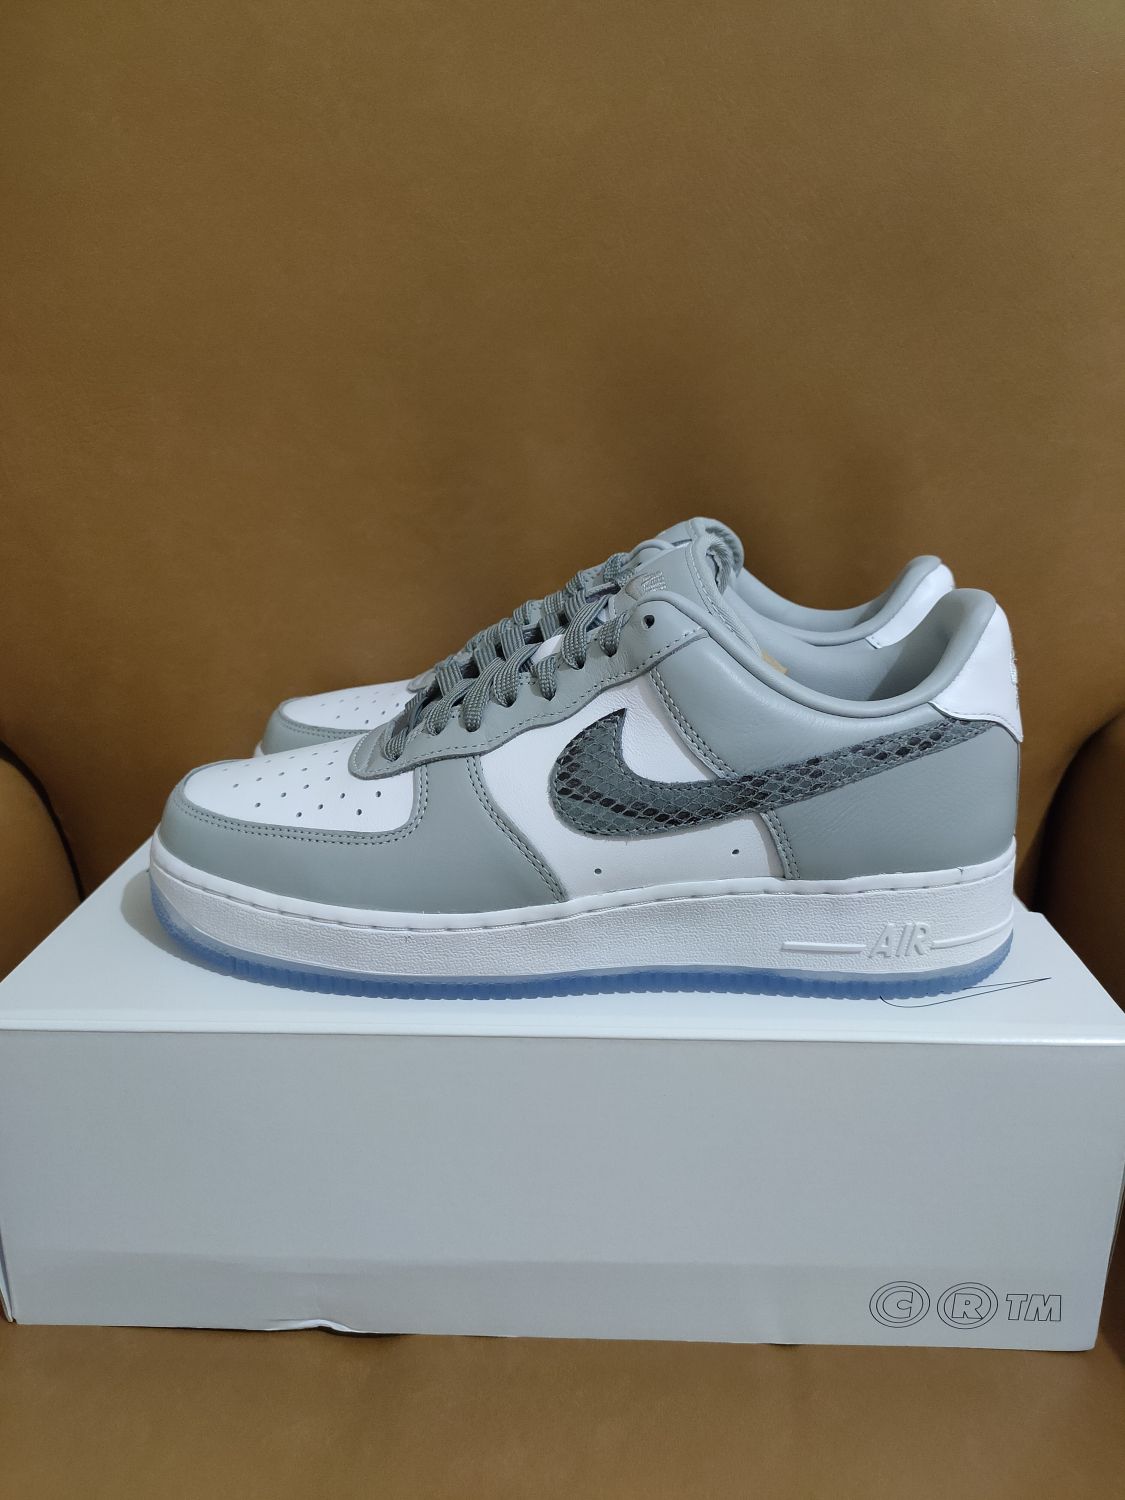 Nike By You Air Force 1 Low Dior Platinum Grey CT3761-991 Men's Size 8.5  Shoes